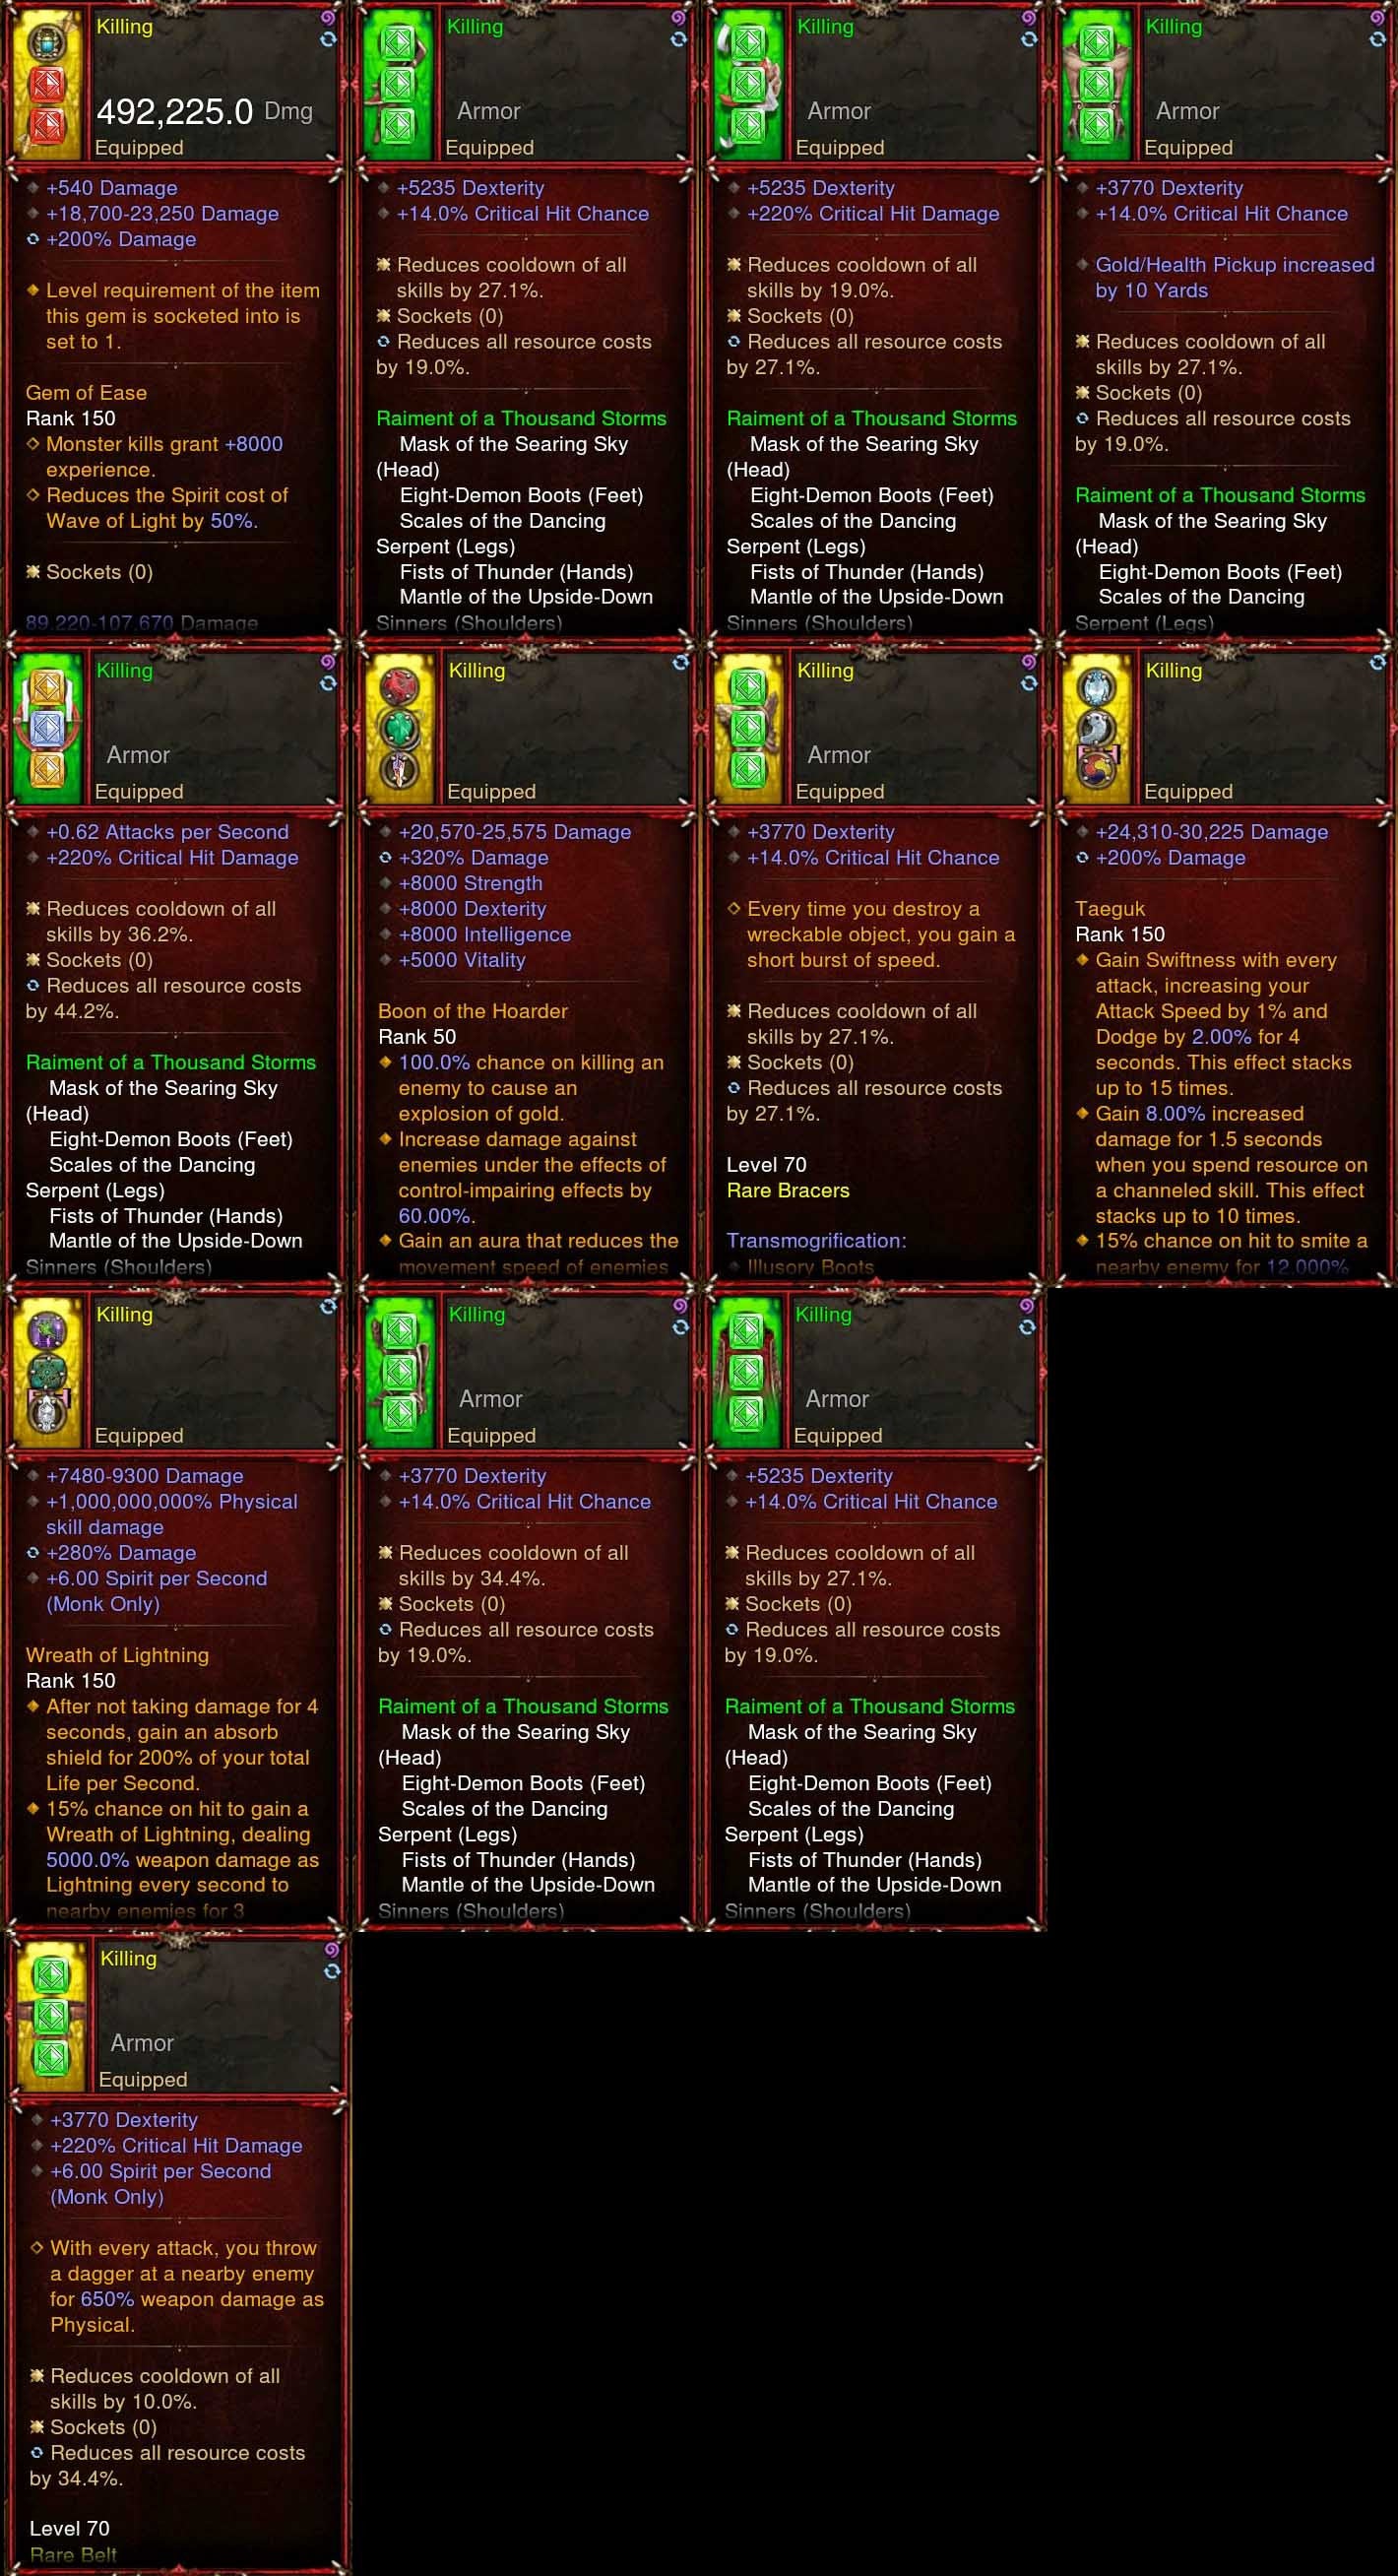 [Primal Ancient] Diablo 3 Immortal v5 Type-R FASTEST TStorms Monk v2 Killing Diablo 3 Mods ROS Seasonal and Non Seasonal Save Mod - Modded Items and Gear - Hacks - Cheats - Trainers for Playstation 4 - Playstation 5 - Nintendo Switch - Xbox One